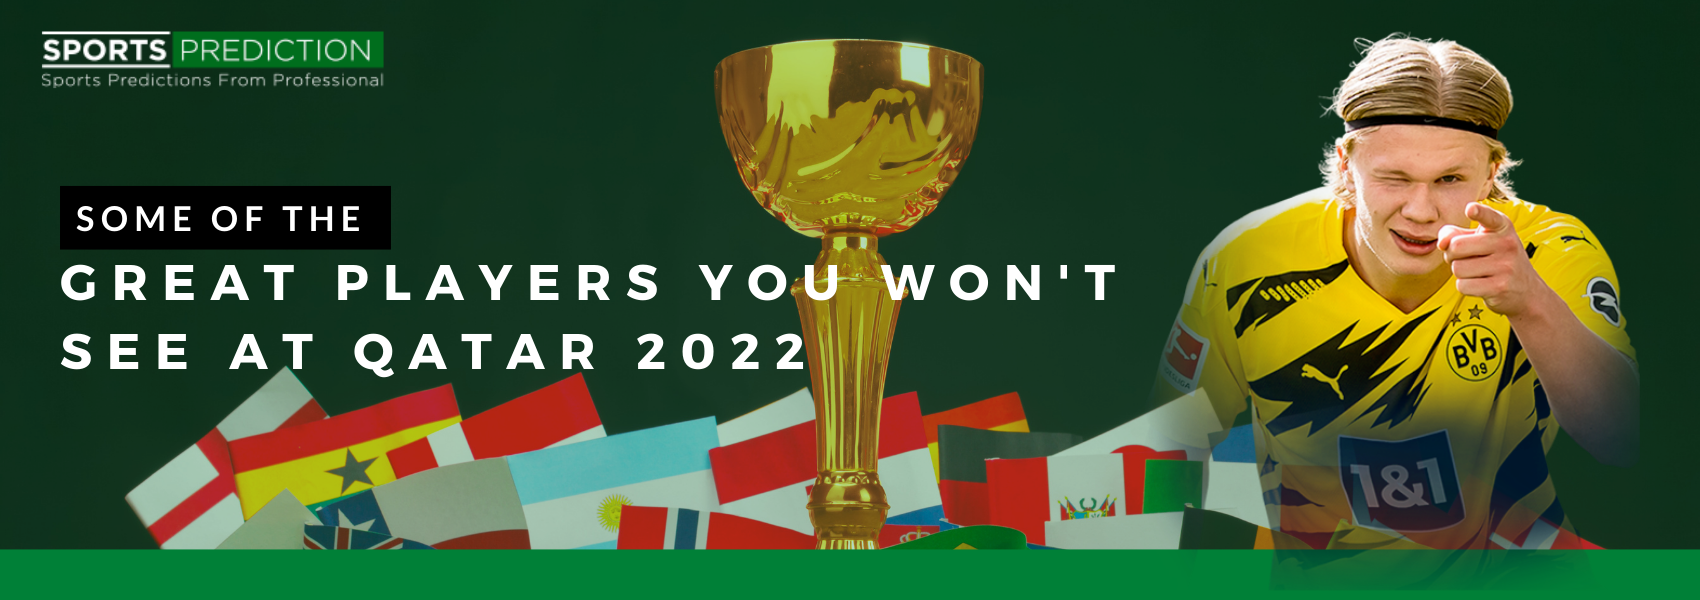 These Are Some Of The Great Players You Won't See at Qatar 2022